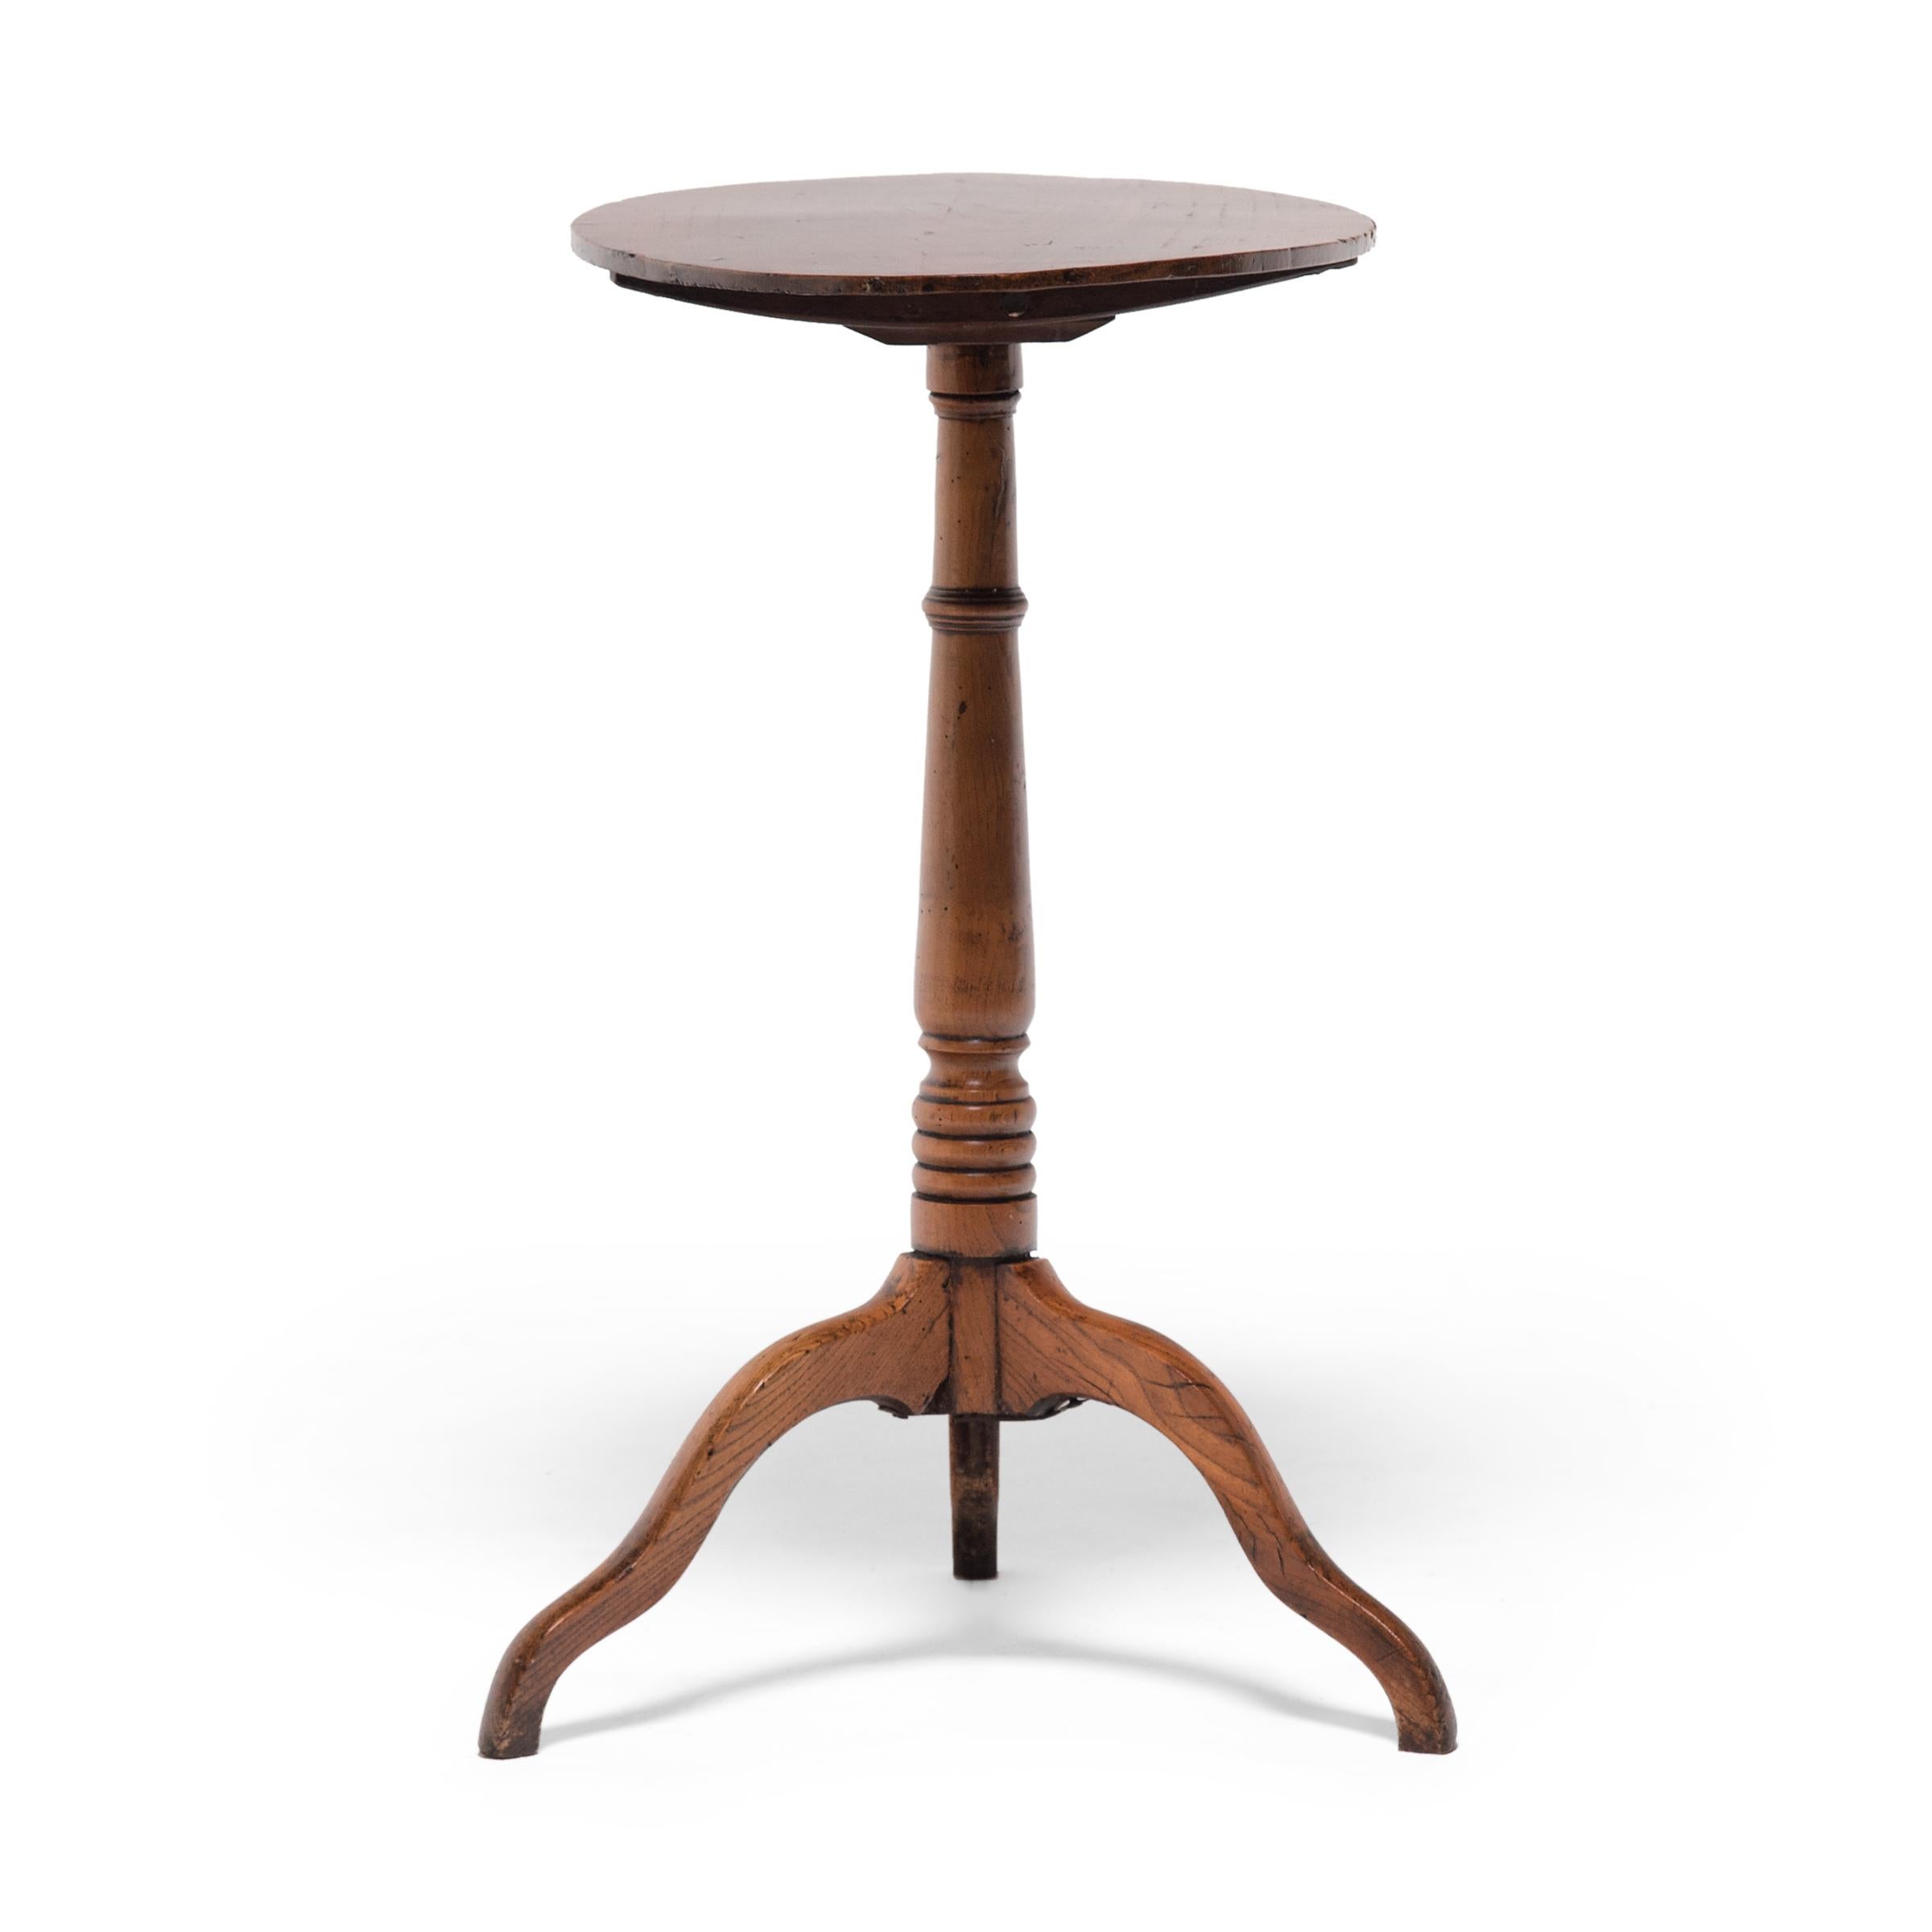 English Oval Top Pedestal Table, c. 1850 For Sale at 1stDibs